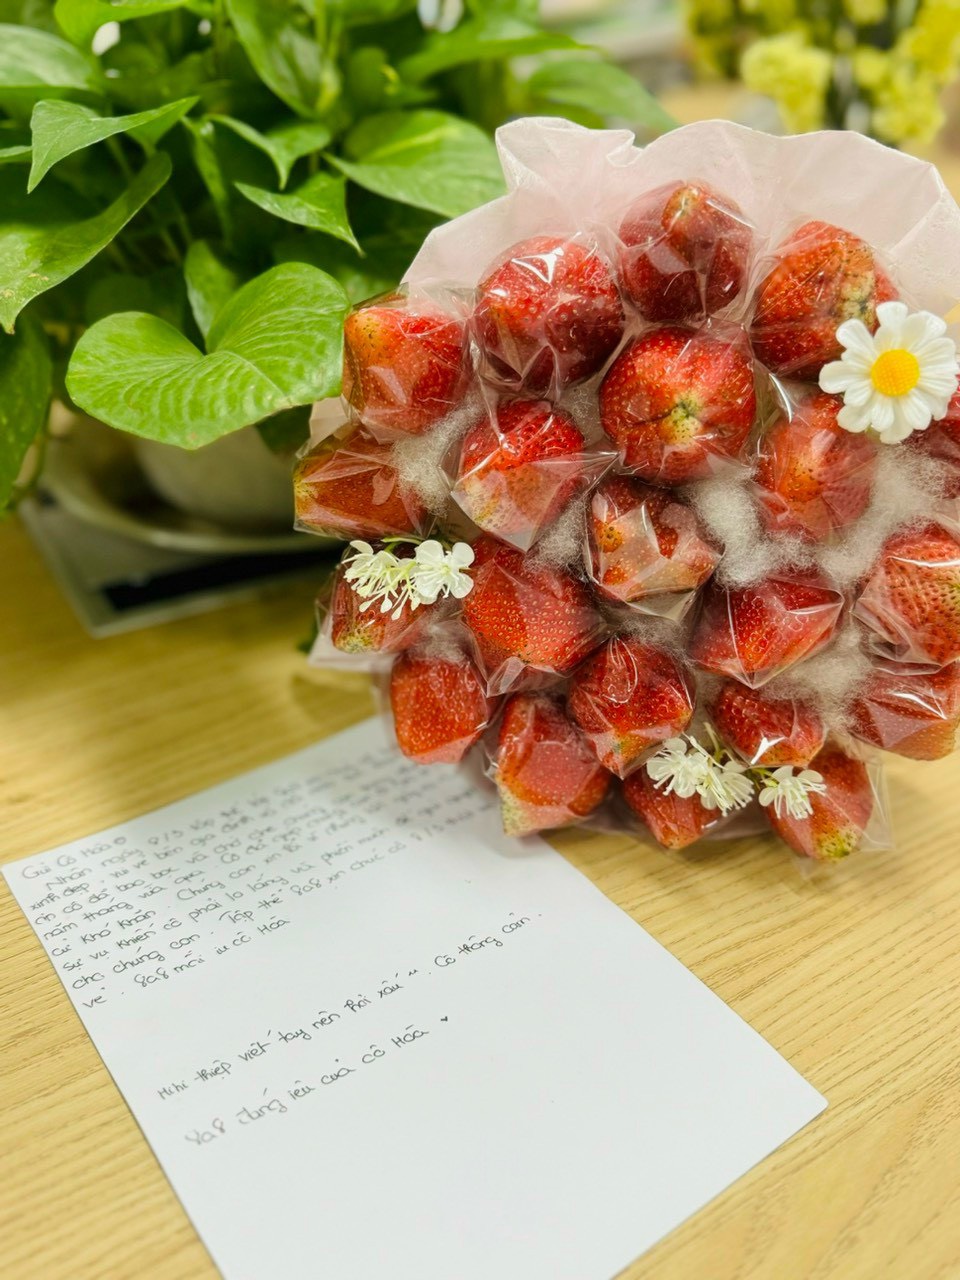 A bouquet of strawberries and a note

Description automatically generated